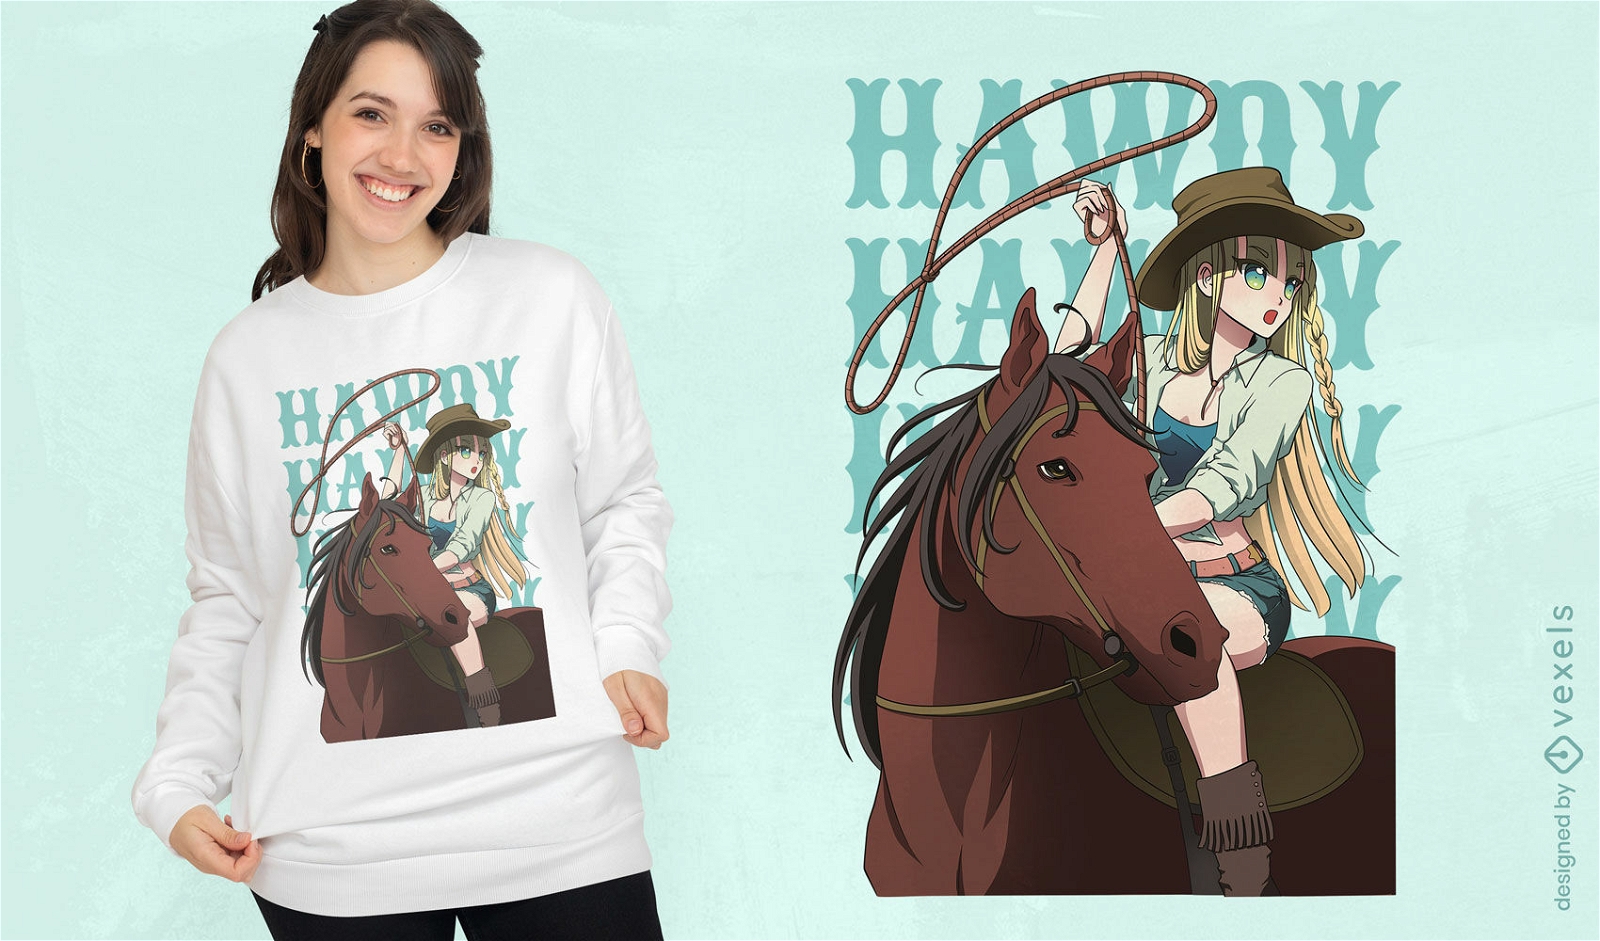 Anime Cowgirl T-shirt Design Vector Download